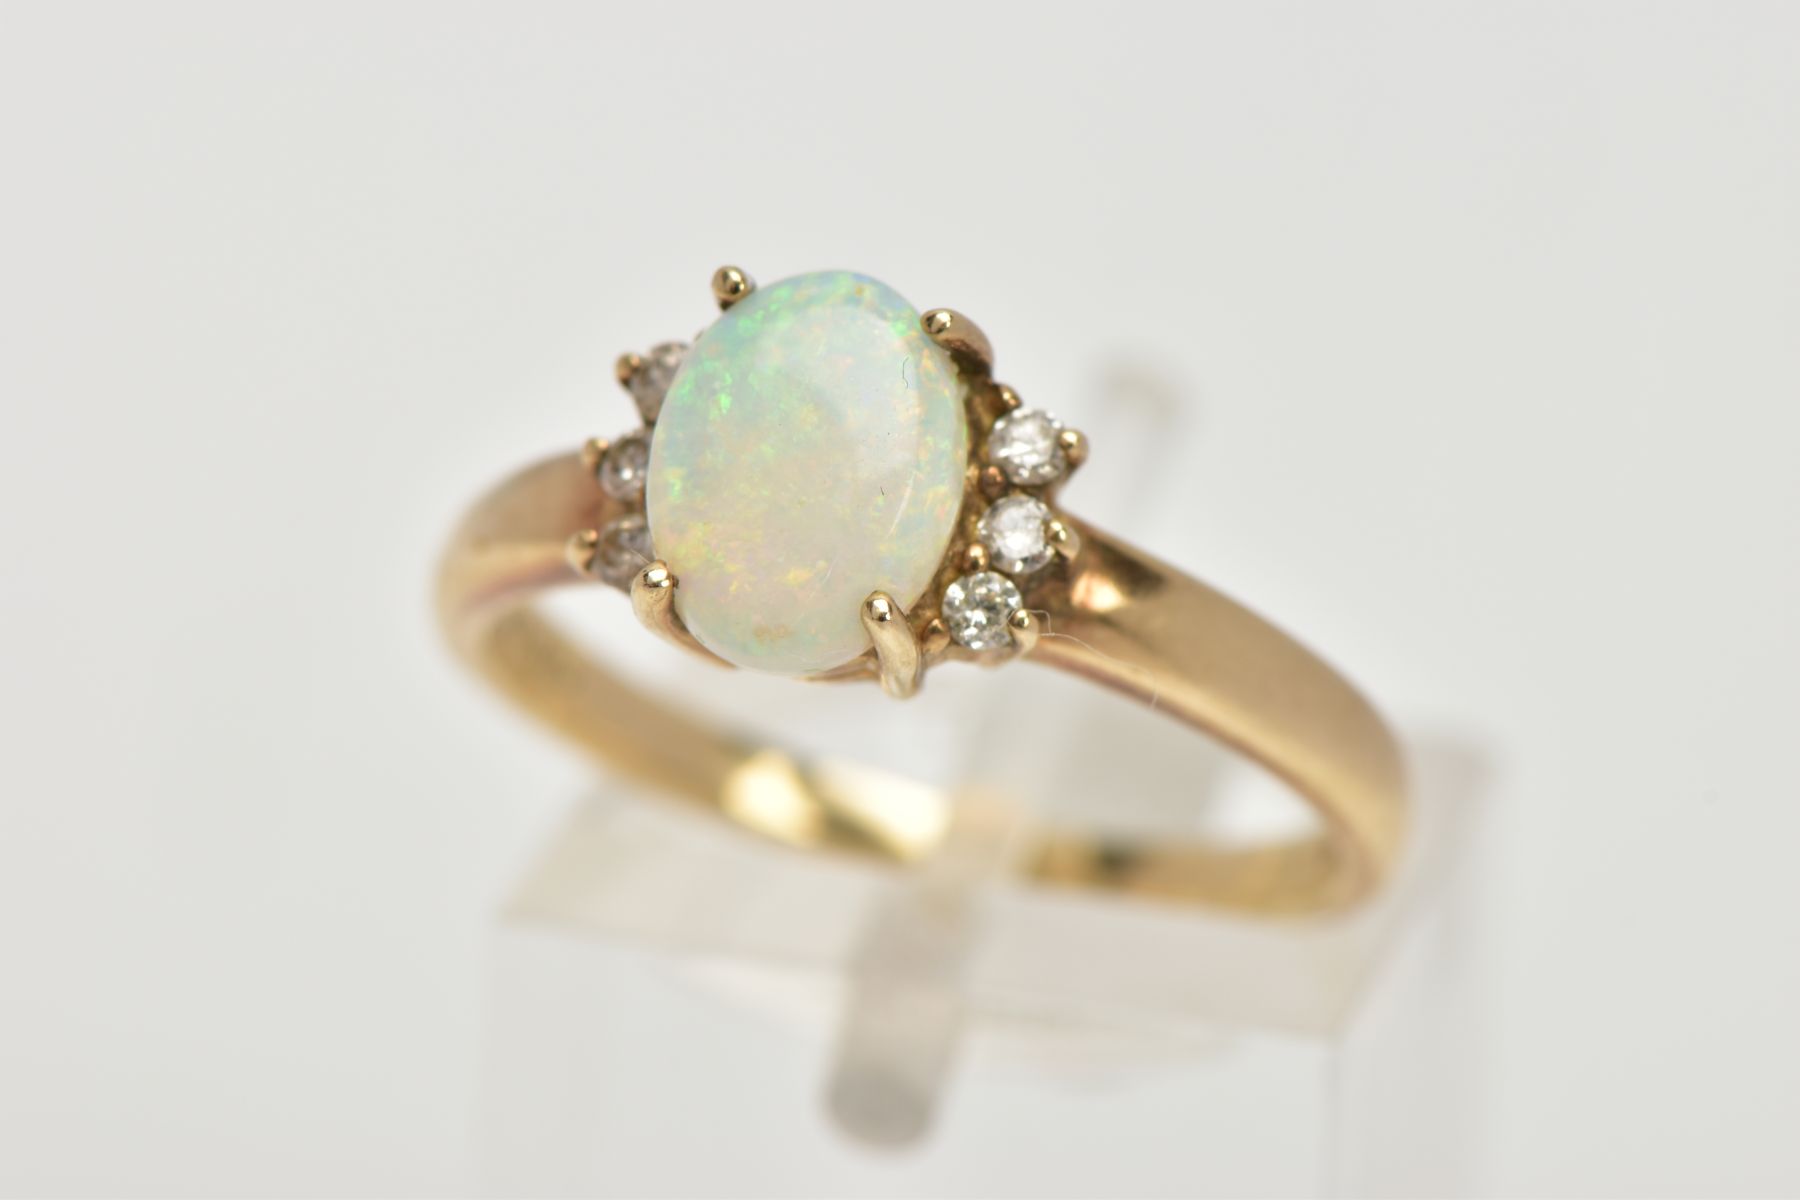 A 9CT GOLD OPAL AND DIAMOND RING, centring on a four claw set oval white opal cabochon, showing